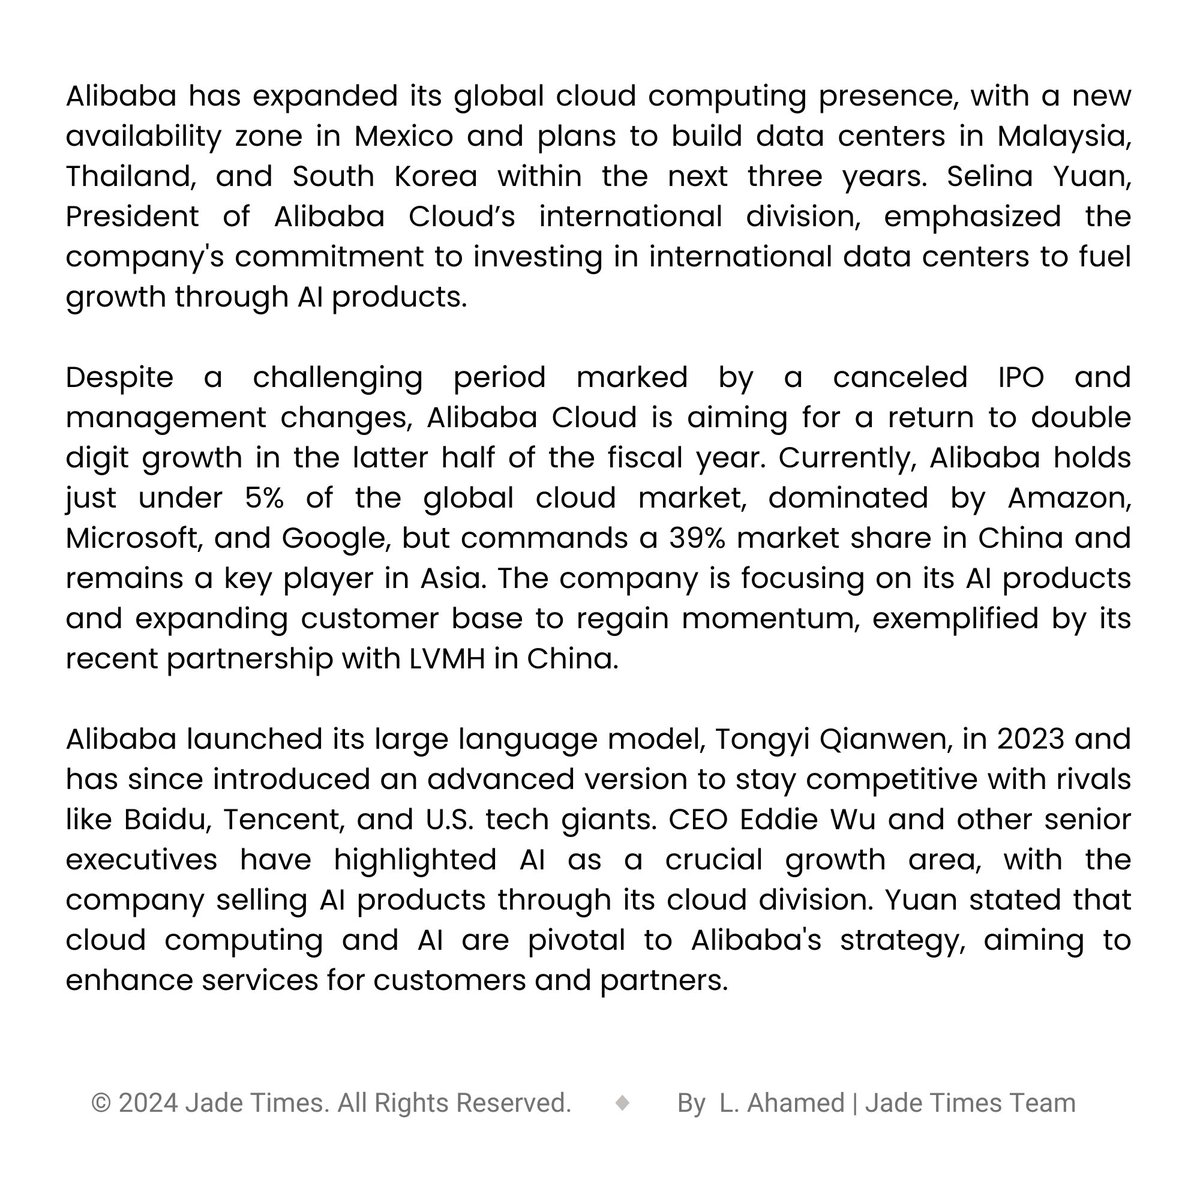 Alibaba is using AI to drive cloud growth and global expansion, aiming to catch up with U.S. tech giants
—— 
Alibaba is expanding its cloud computing globally, emphasizing AI to drive growth. 
——
Visit the link in our bio.
#jadetimes #AlibabaCloud #AIInnovation #GlobalExpansion